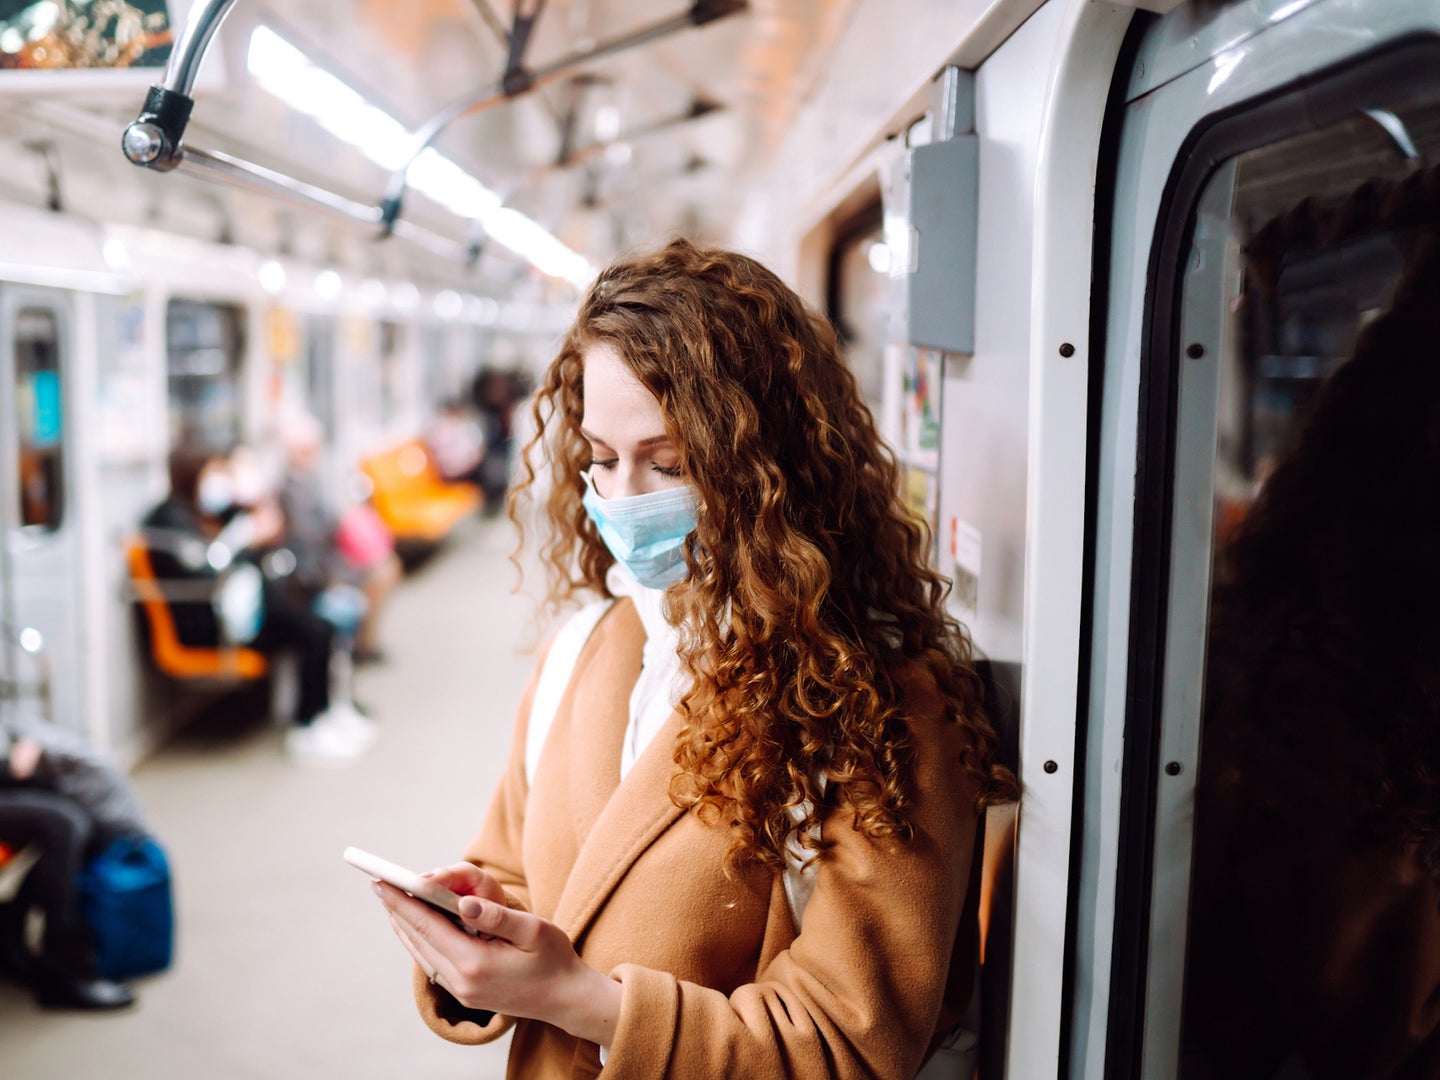 Woman wearing face mask while looking at phone while standing in subway car